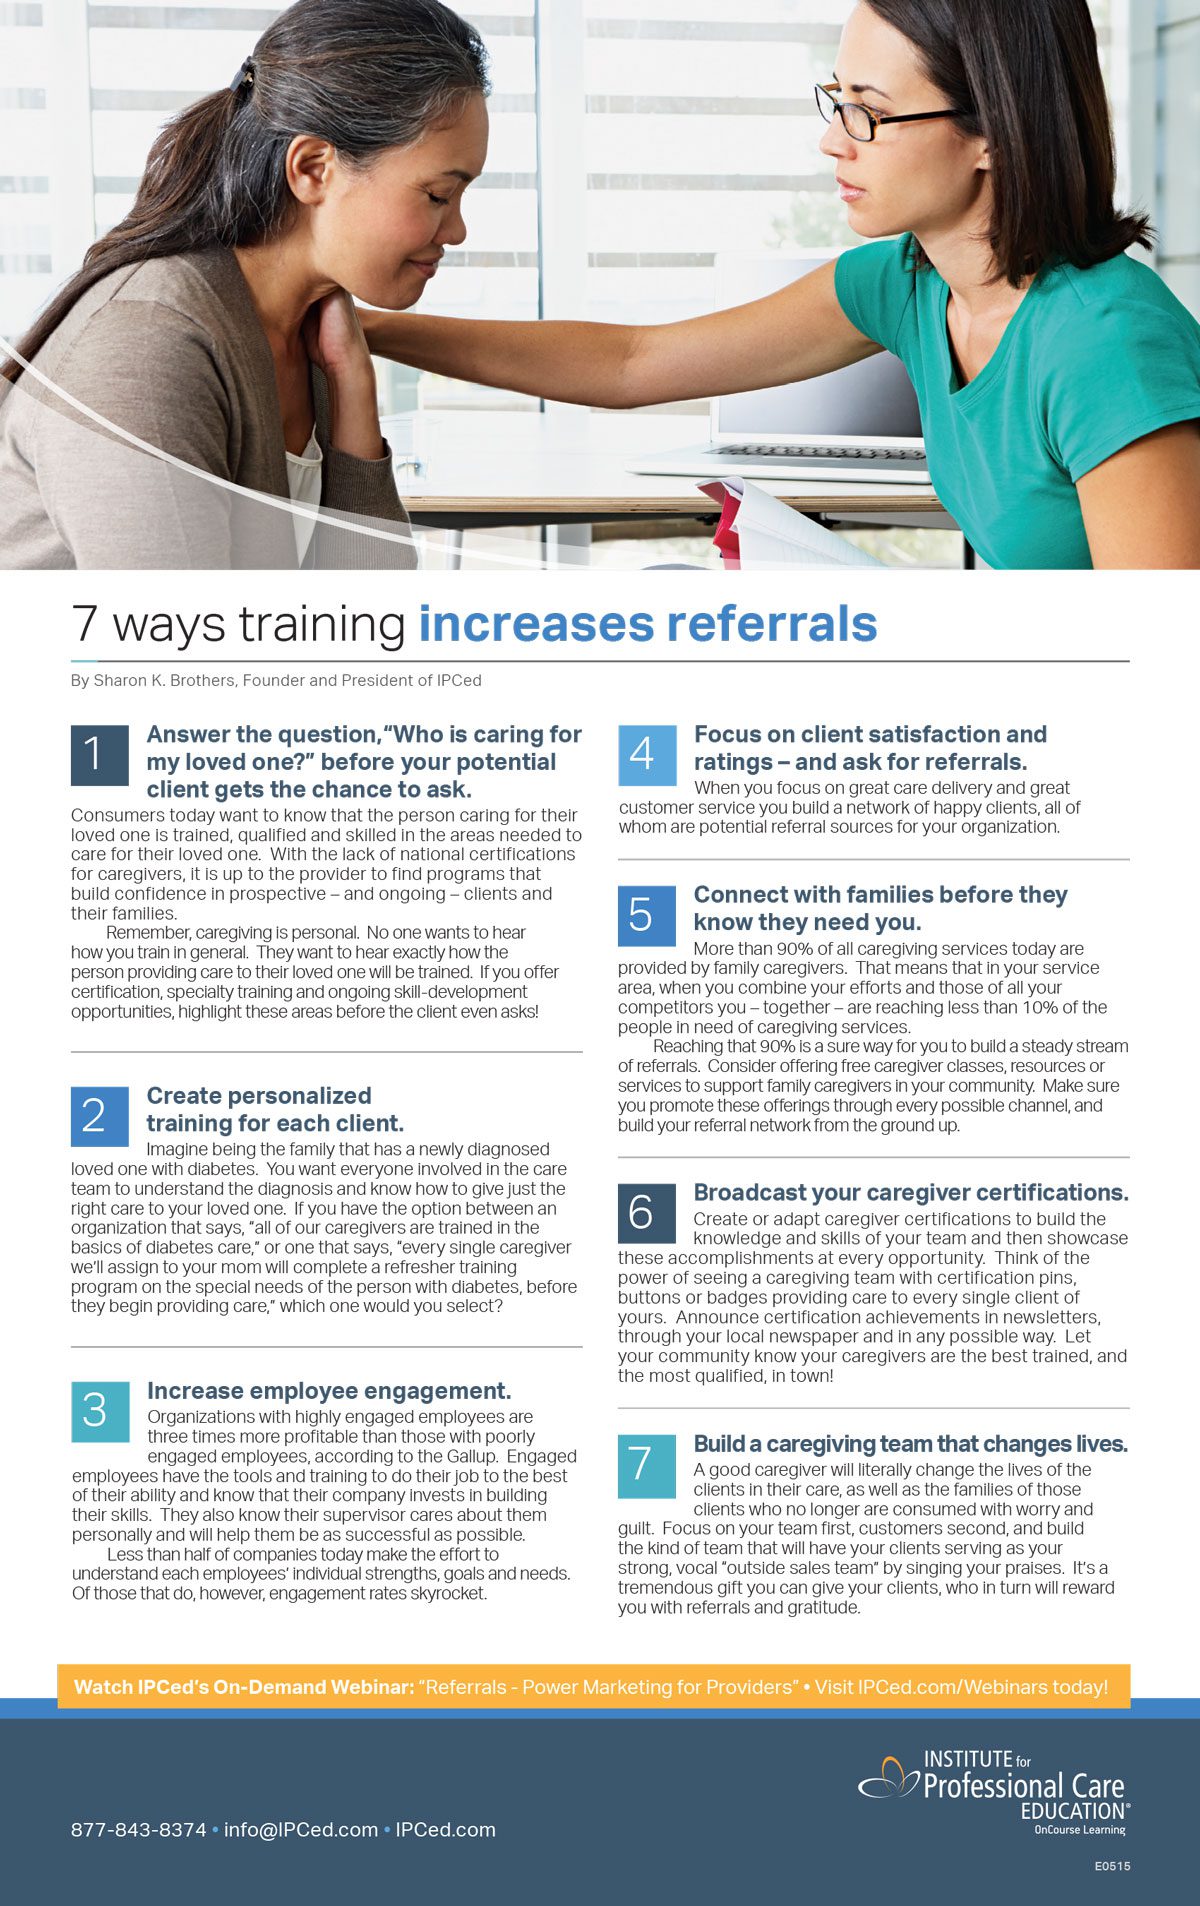 7 Ways Training Increases Referrals Infographic